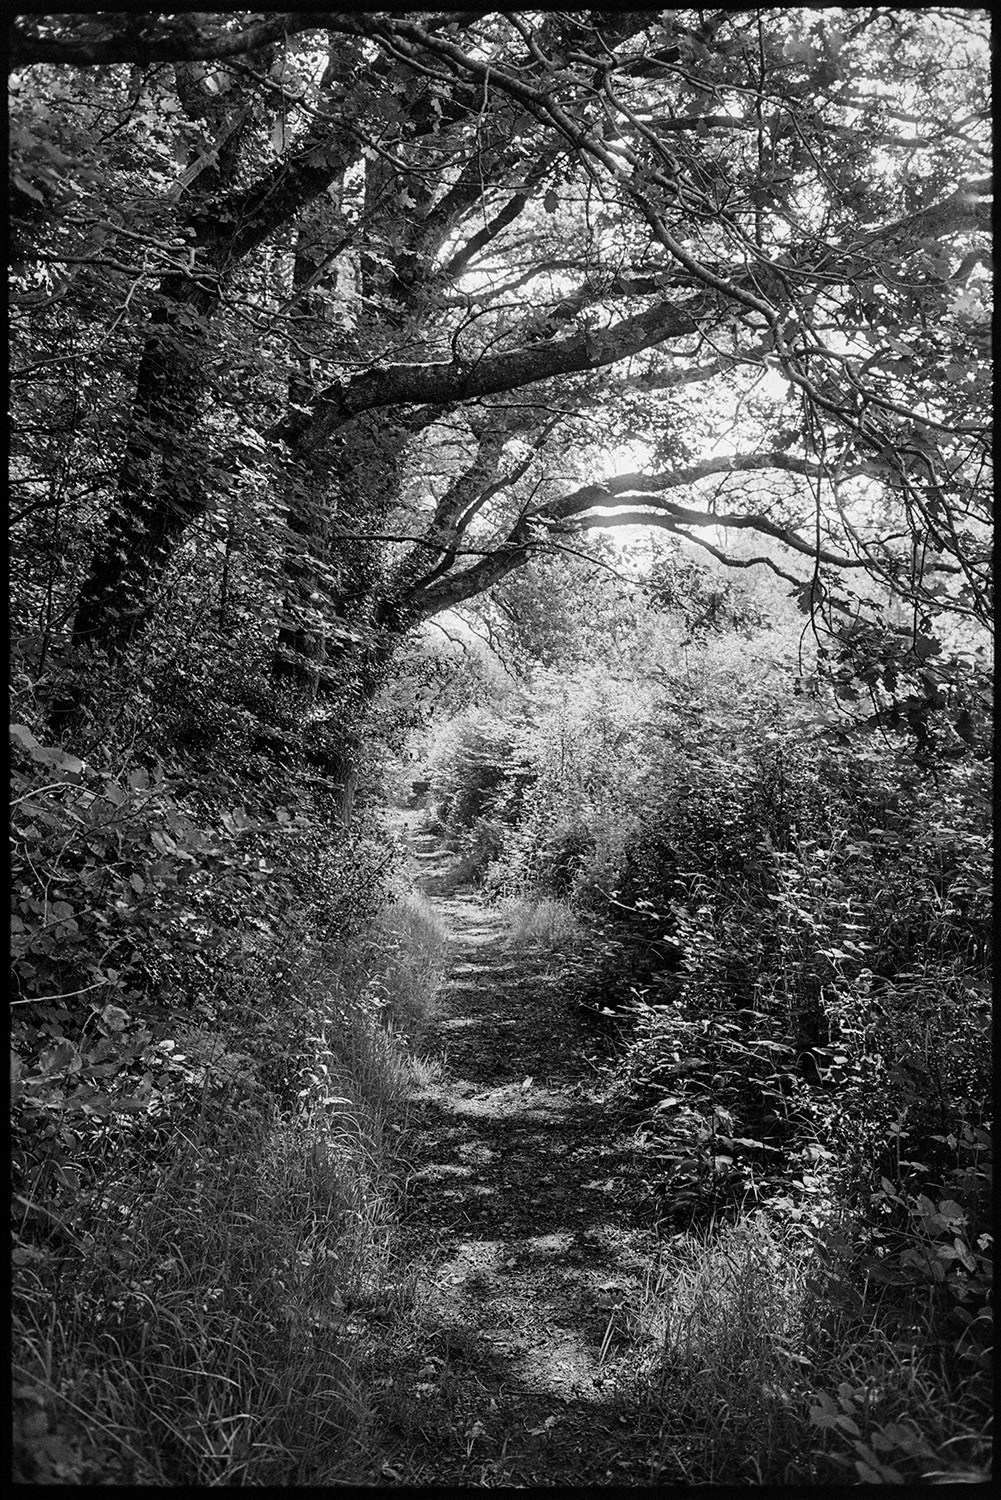 Path through trees.
[A path running between hedgerows and overhanging trees at Budds Mill, Dolton.]